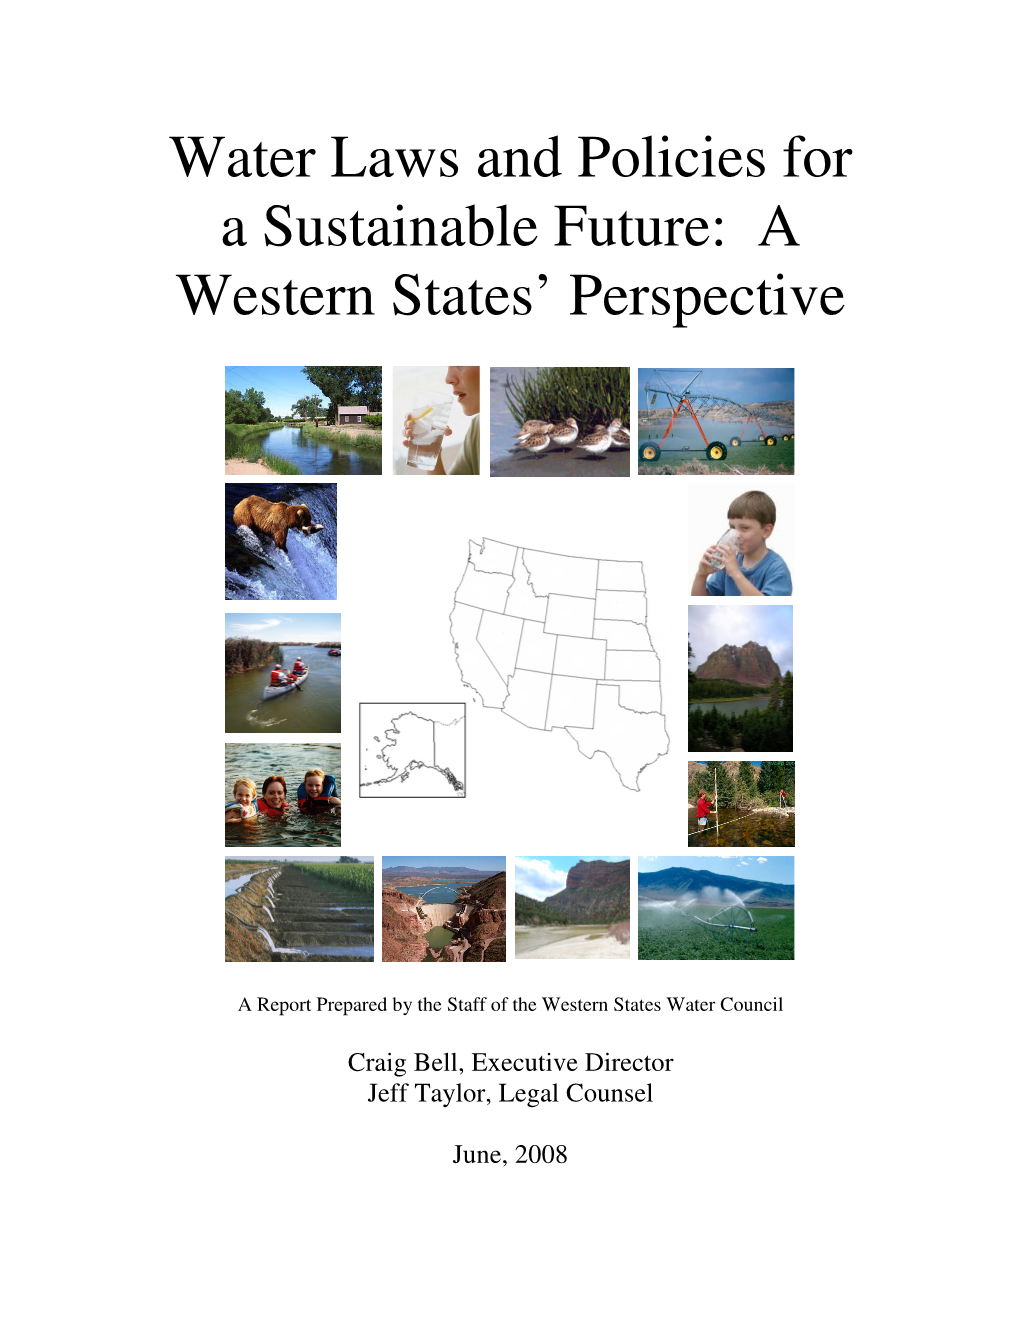 Water Laws and Policies for a Sustainable Future: a Western States’ Perspective